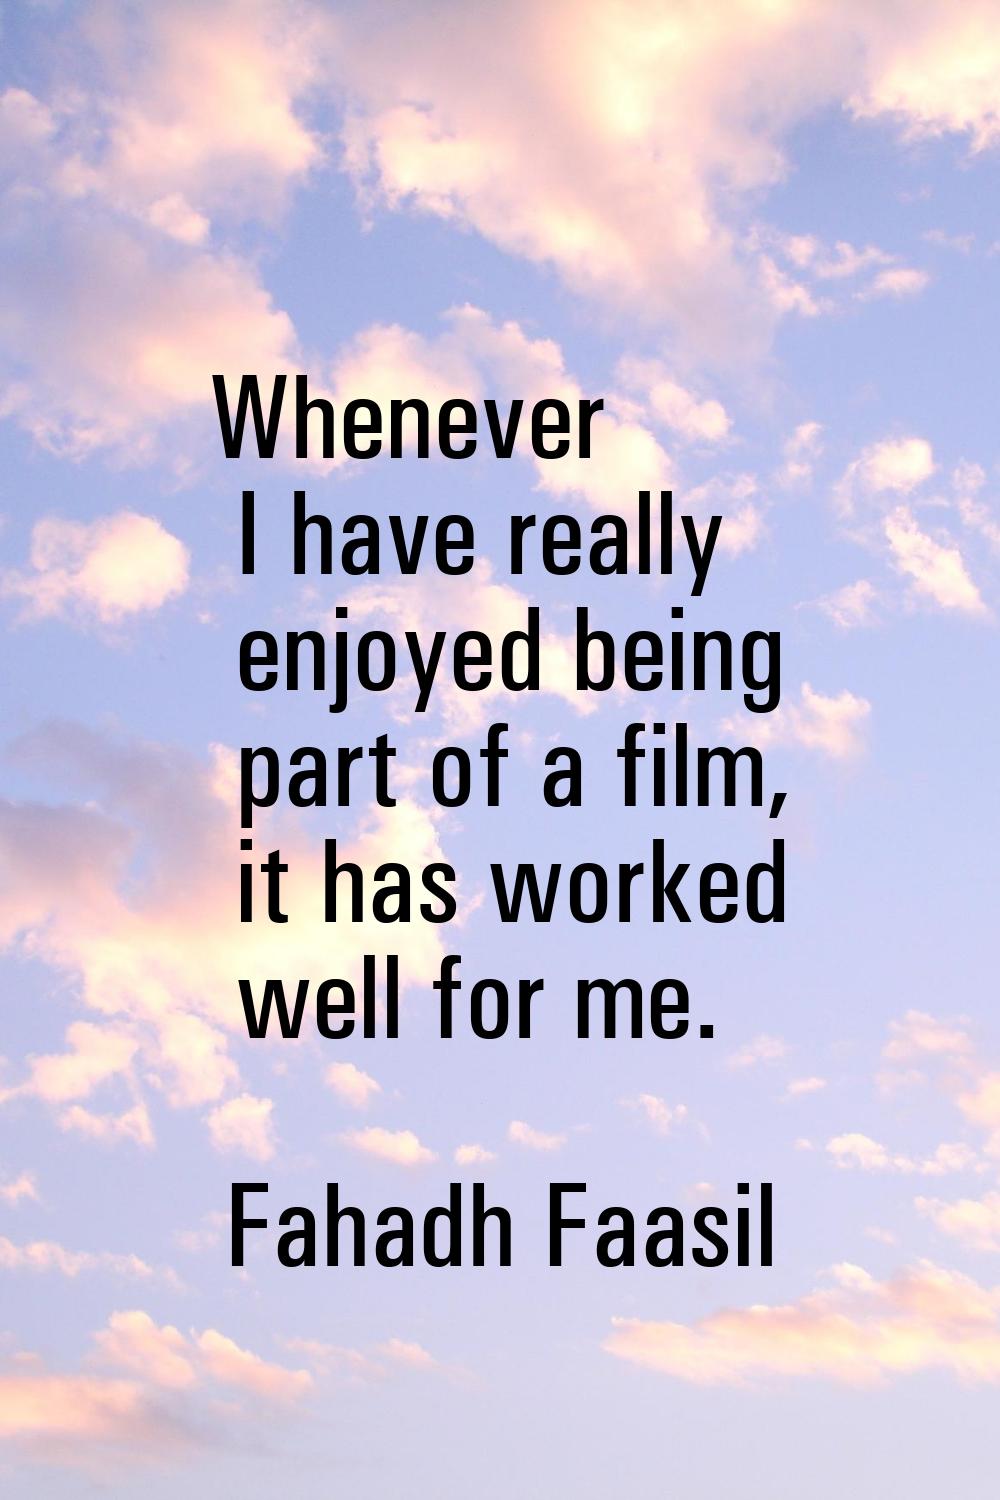 Whenever I have really enjoyed being part of a film, it has worked well for me.